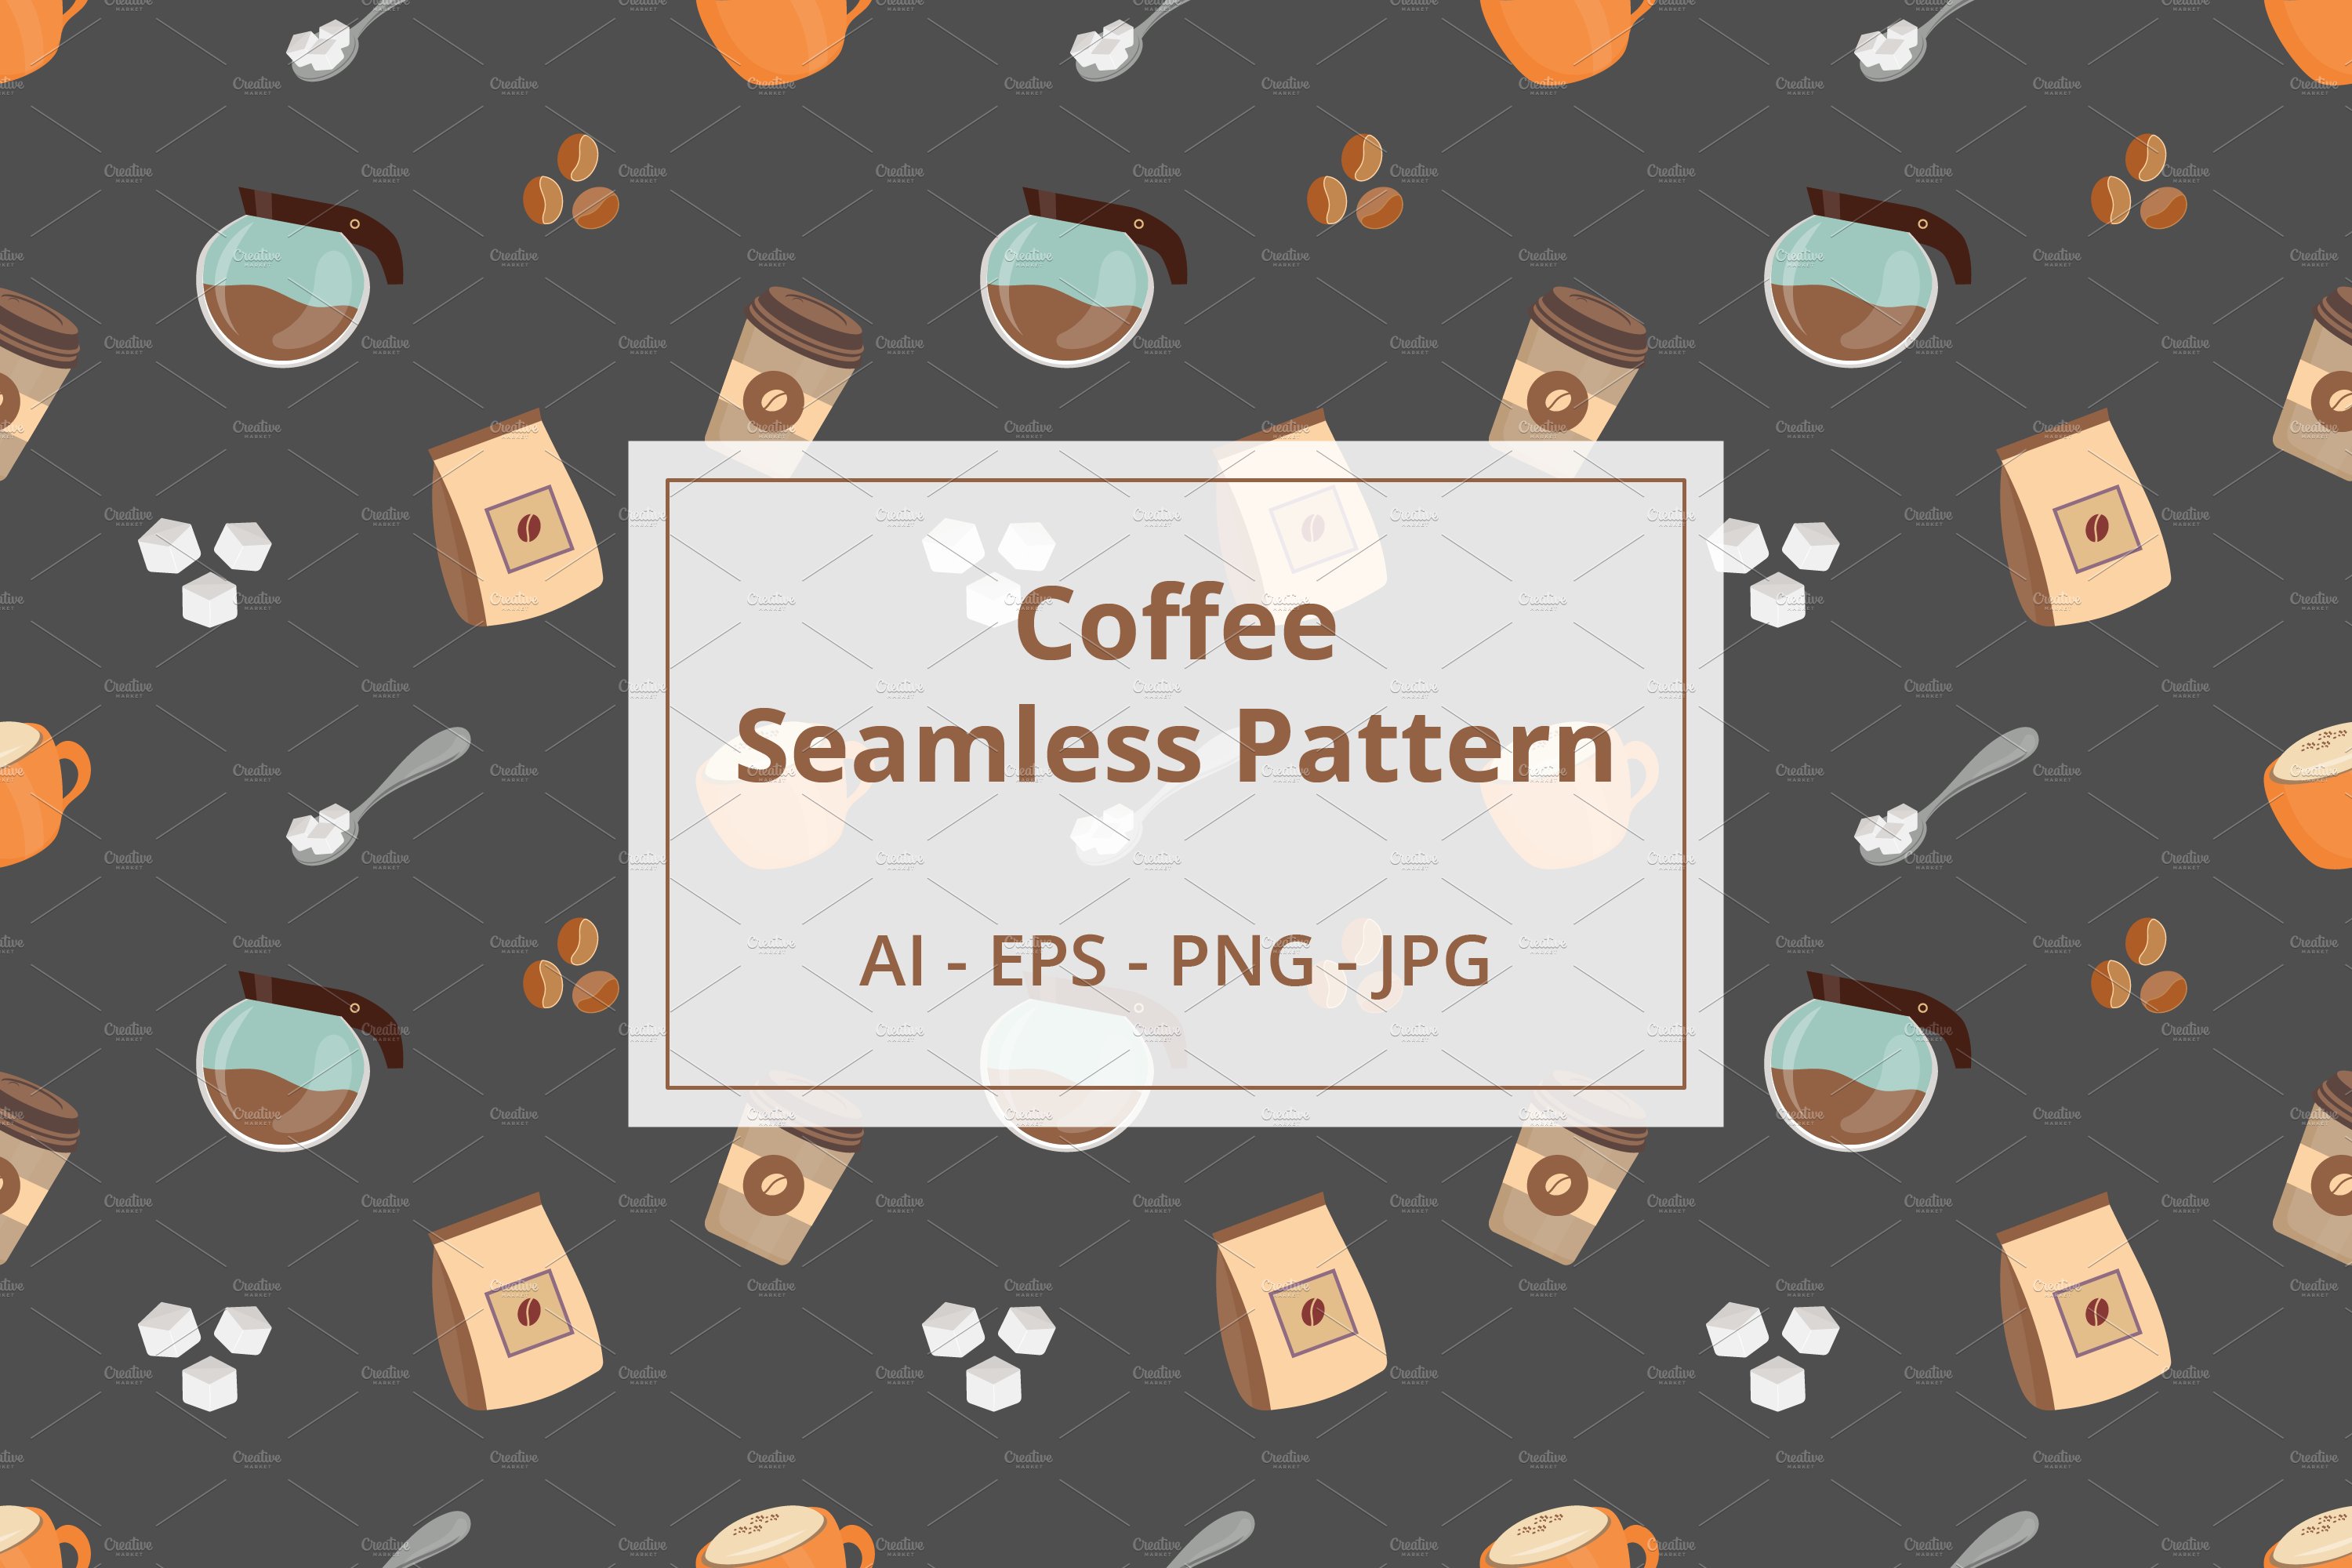 Coffee Seamless Pattern cover image.